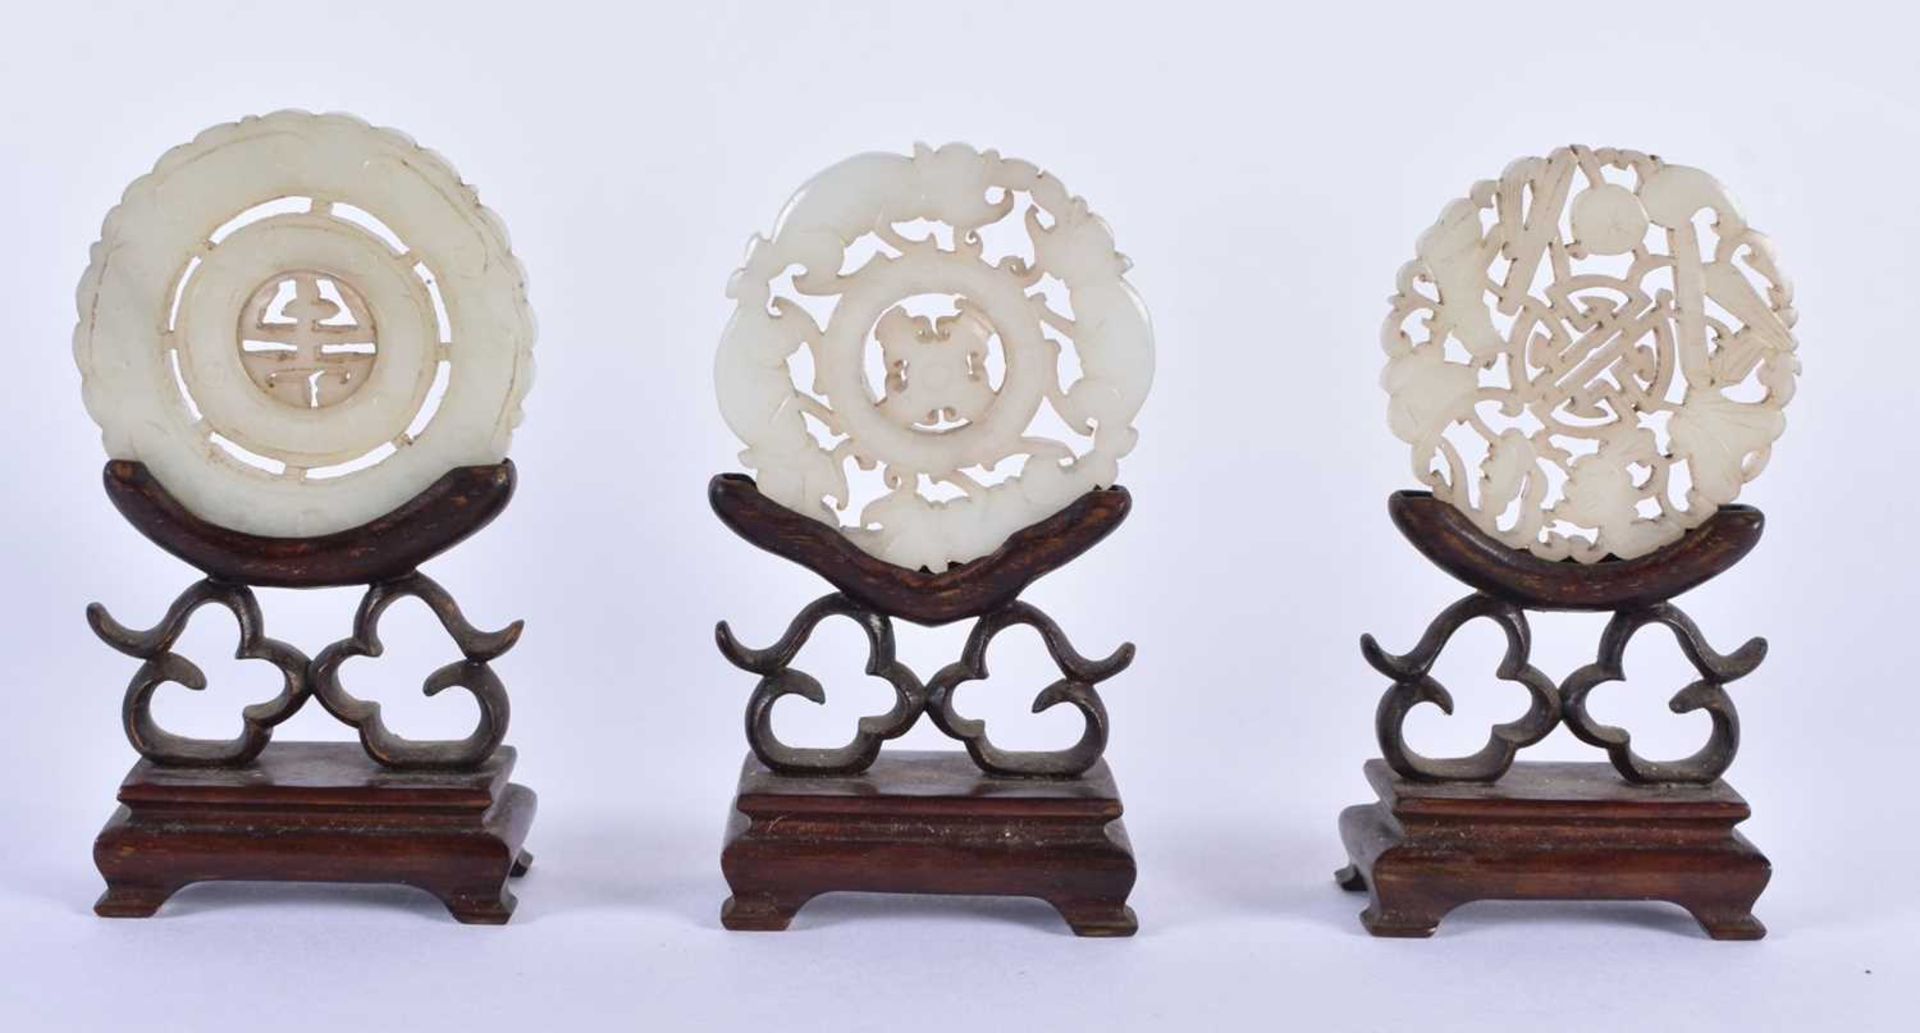 THREE 19TH CENTURY CHINESE GREEN JADE ROUNDELS Qing, in various forms. Jade 5 cm wide. (3)